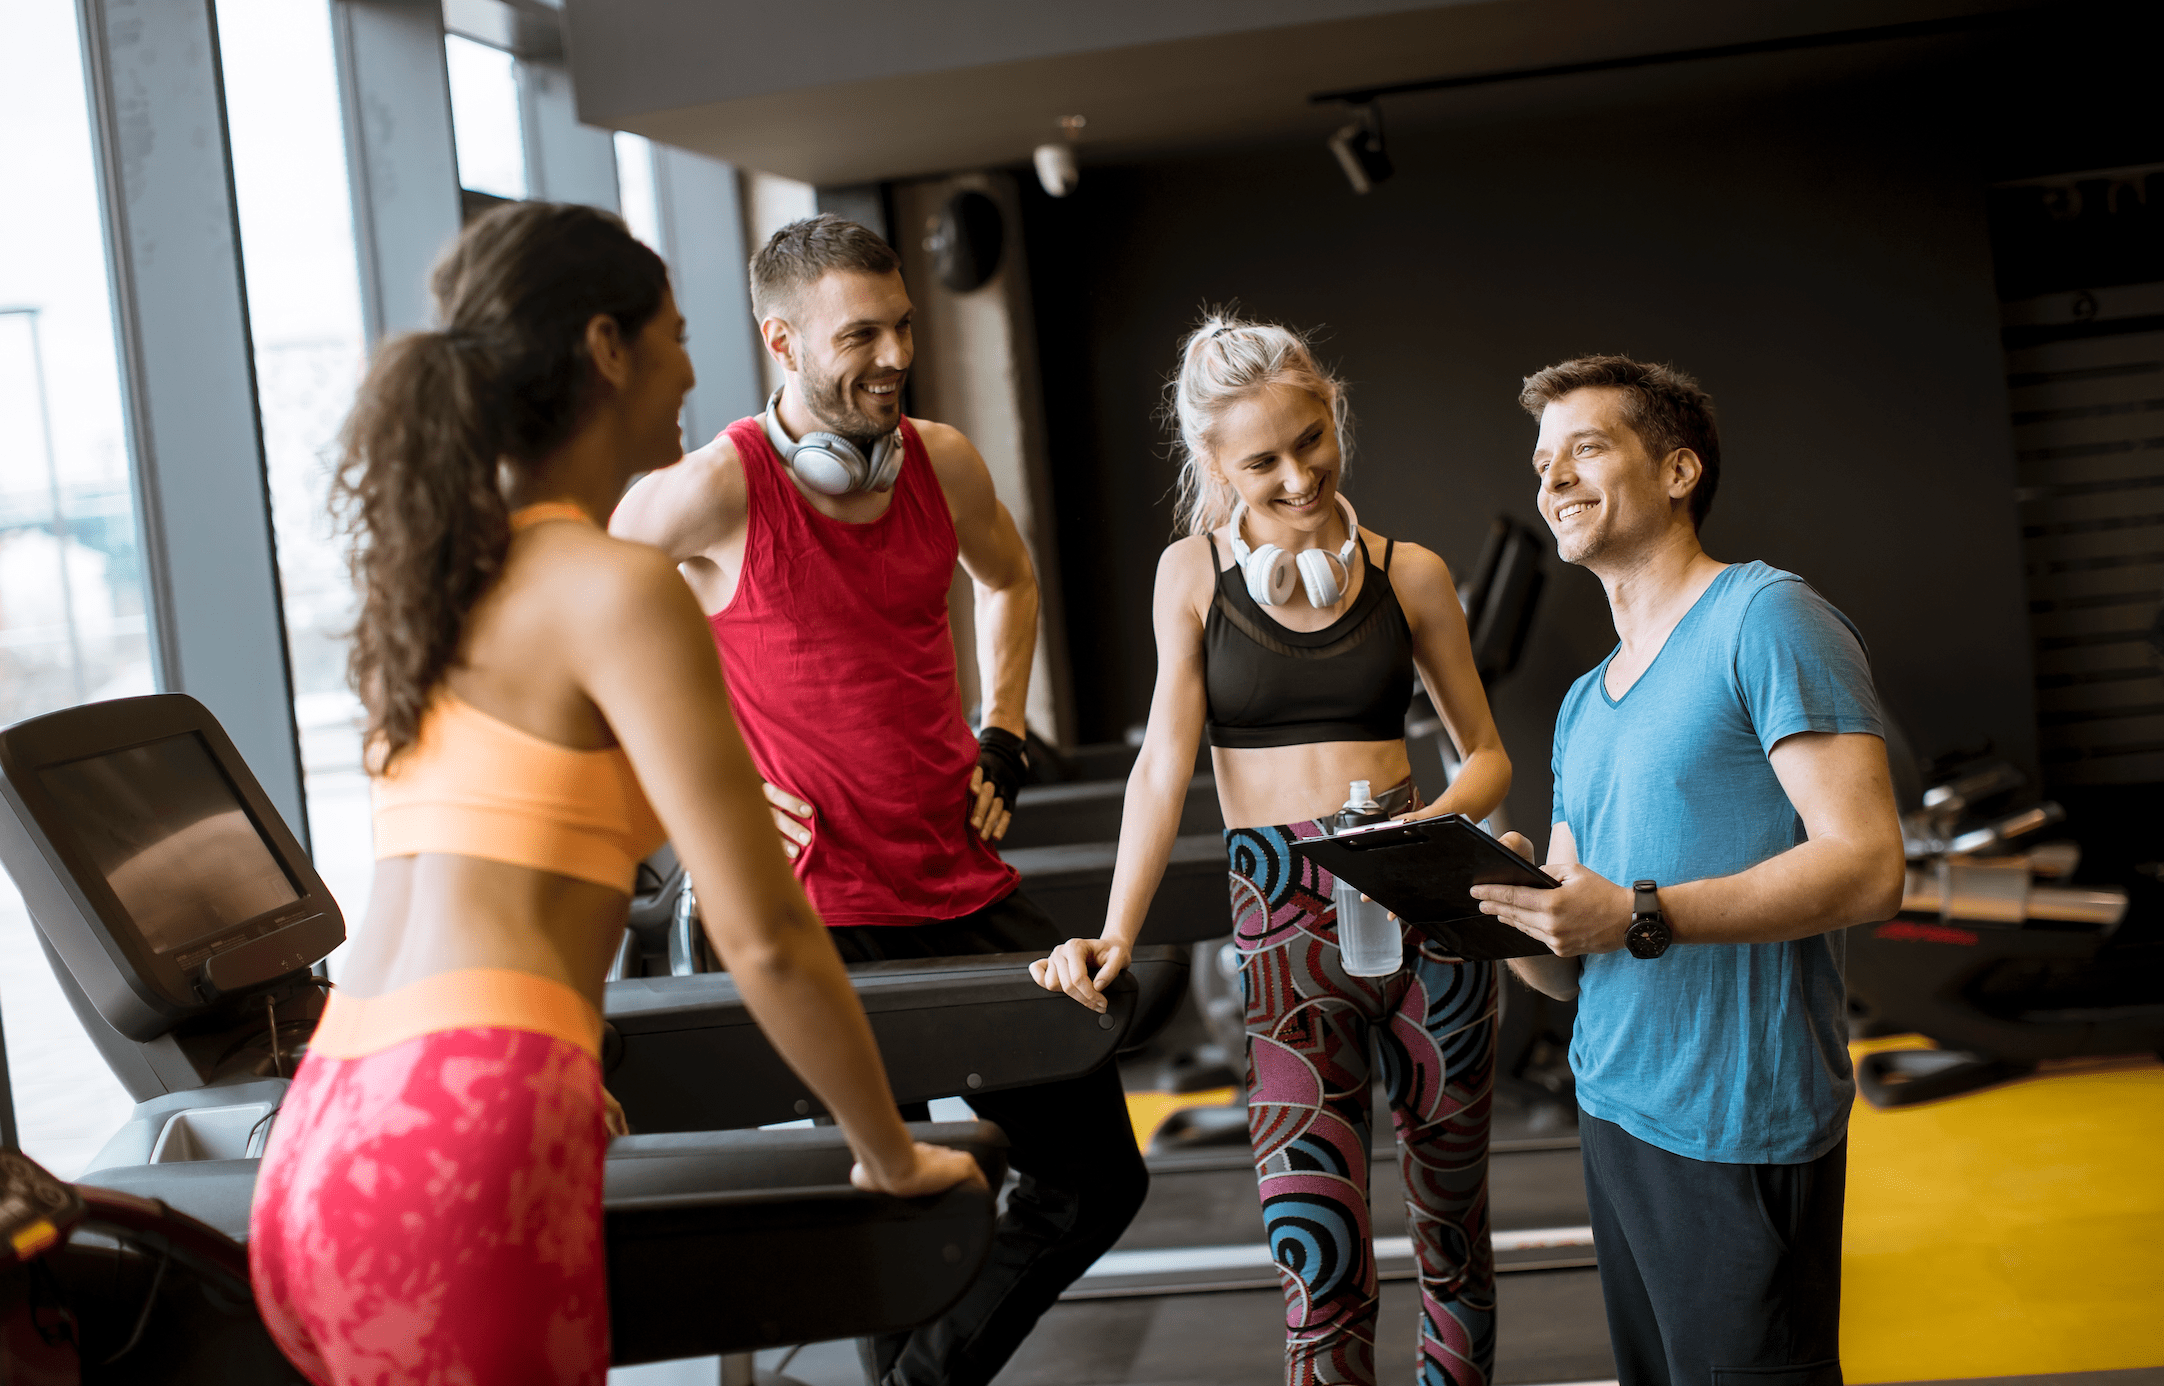 Should I Create My Own Business, Work in a Fitness Club, or Both?